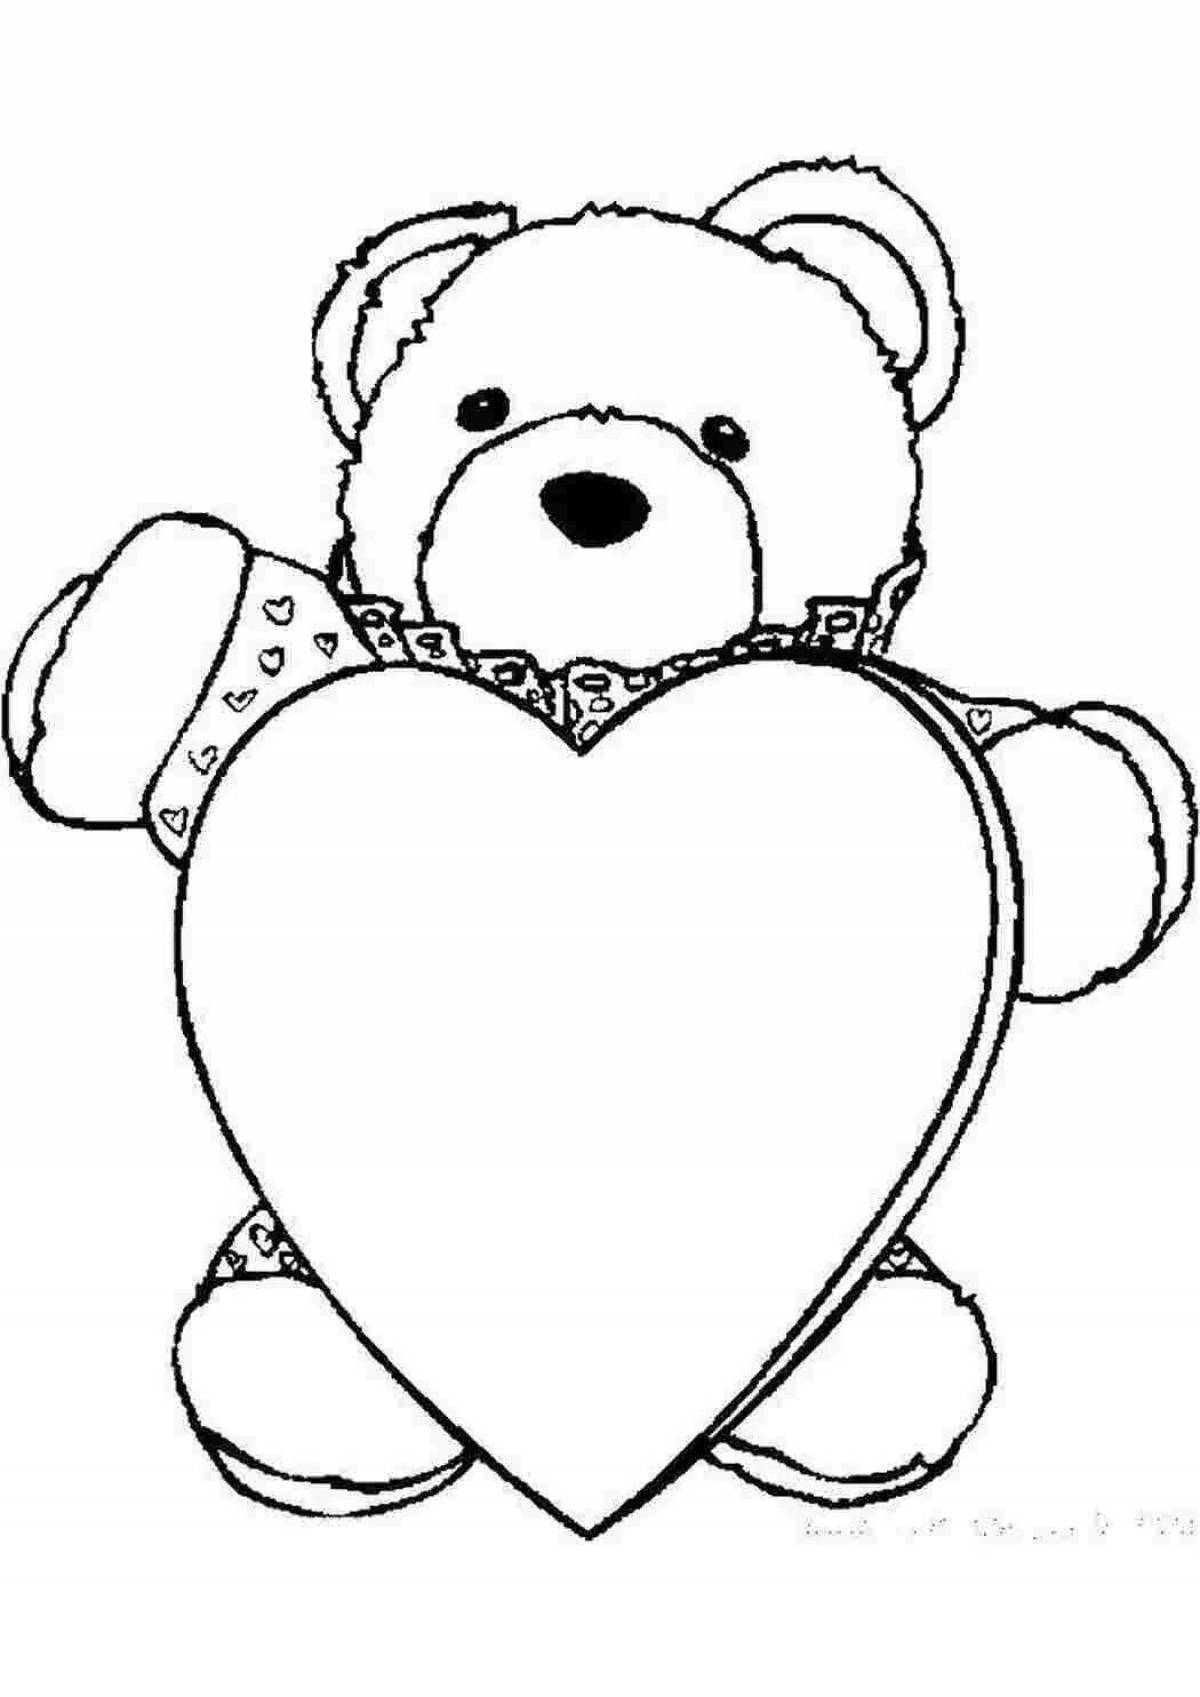 Coloring book bold teddy bear with a heart